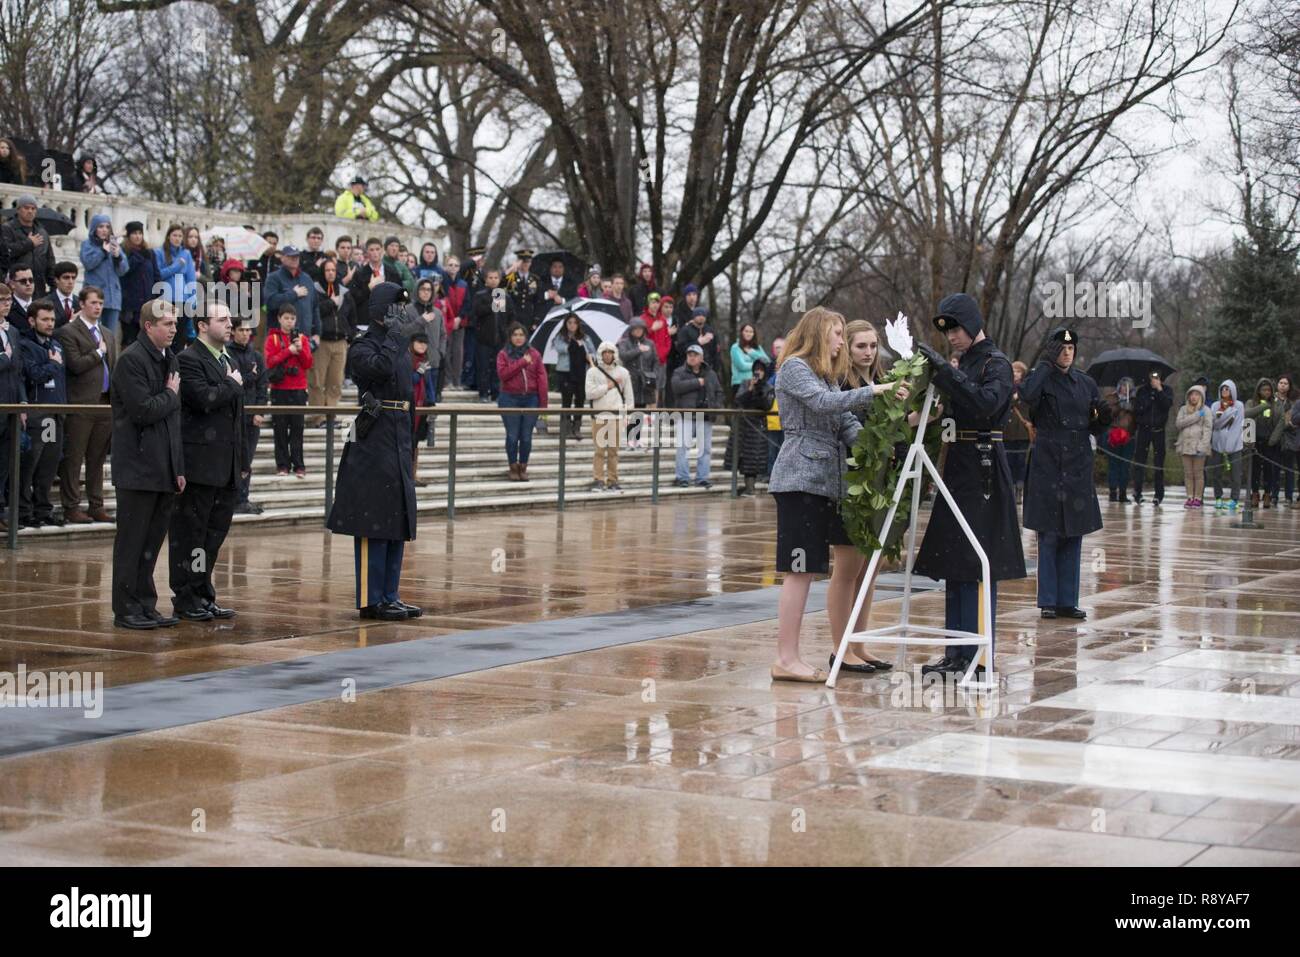 From the left, Andrew Pogue, from Missouri; Dakota Fleury, from Washington, D.C.; Marion Lovett, from New Hampshire; and Amanda Finnegan, from South Dakota; represent the high school students participating in the United States Senate Youth Program during a wreath laying ceremony at the Tomb of the Unknown Soldier in Arlington National Cemetery, March 10, 2017, in Arlington, Va. The students also toured the Memorial Amphitheater Display Room. Stock Photo